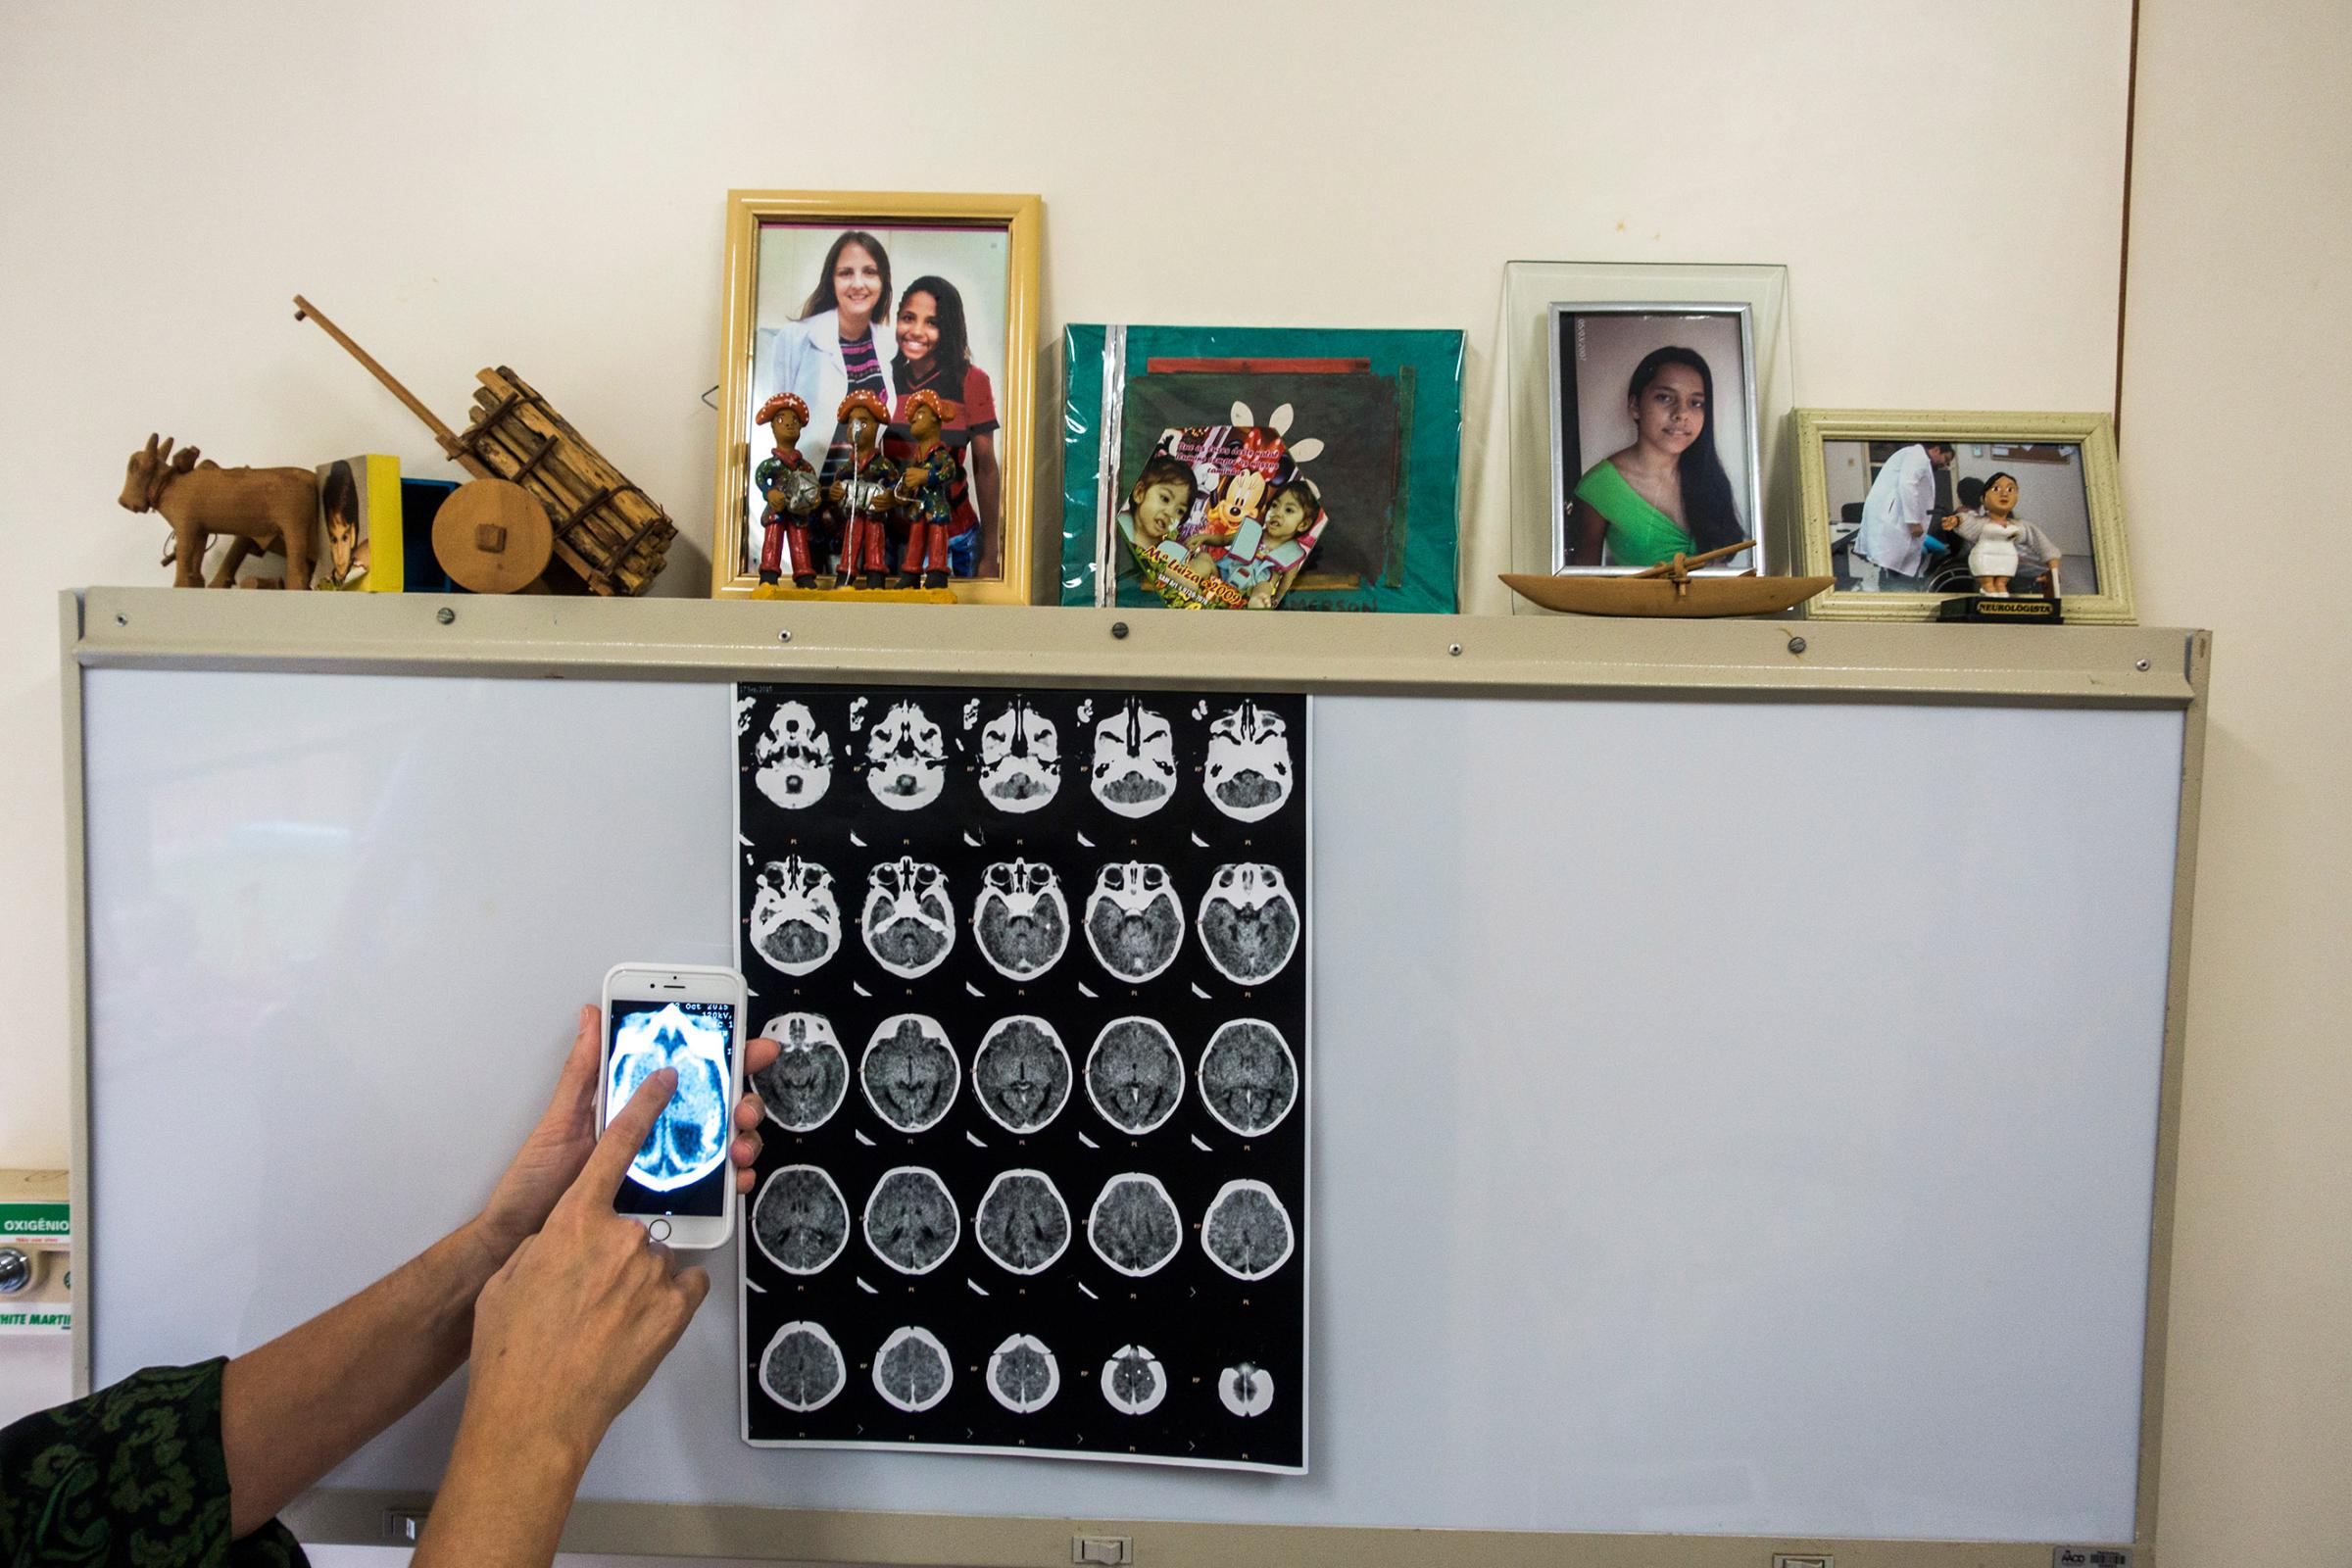 Dr. Vanessa Van Der Linden shows brain scan images from a boy with microcephaly at the Associacao de Assistencia a Crianca Deficiente, a rehabilitation center for disabled children, in Recife, Brazil, Feb. 1, 2016.